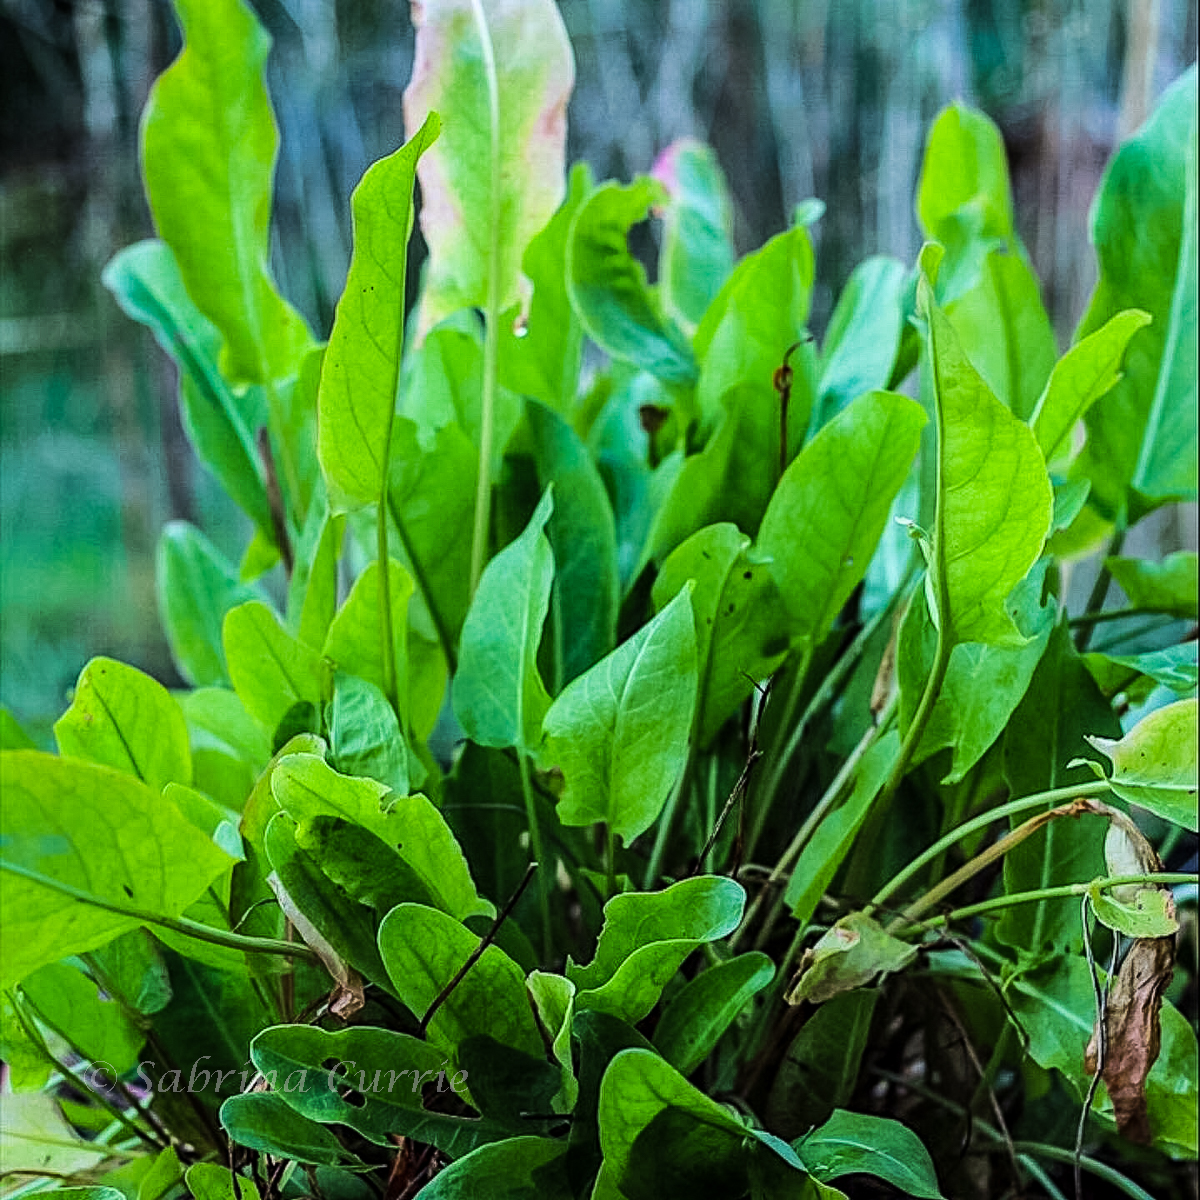 Bright green, upright, oval shaped sorrel leaves growing.